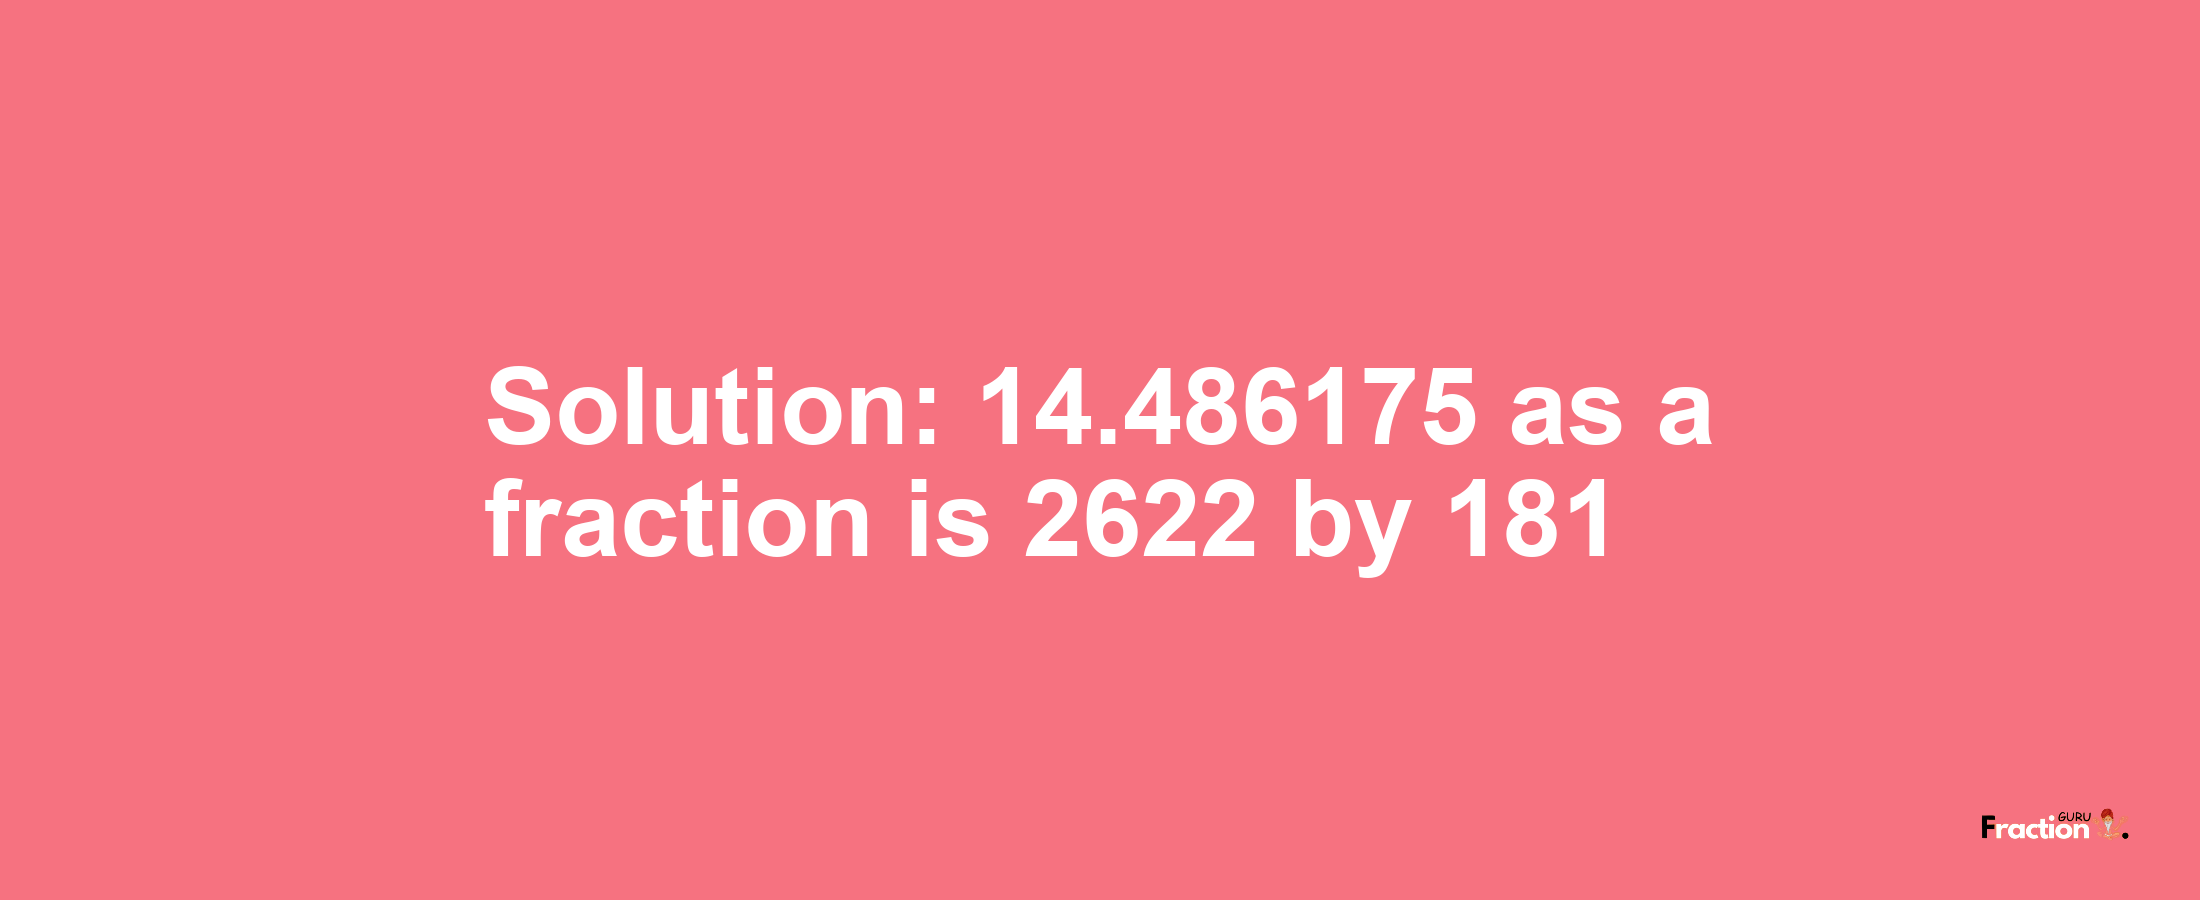 Solution:14.486175 as a fraction is 2622/181